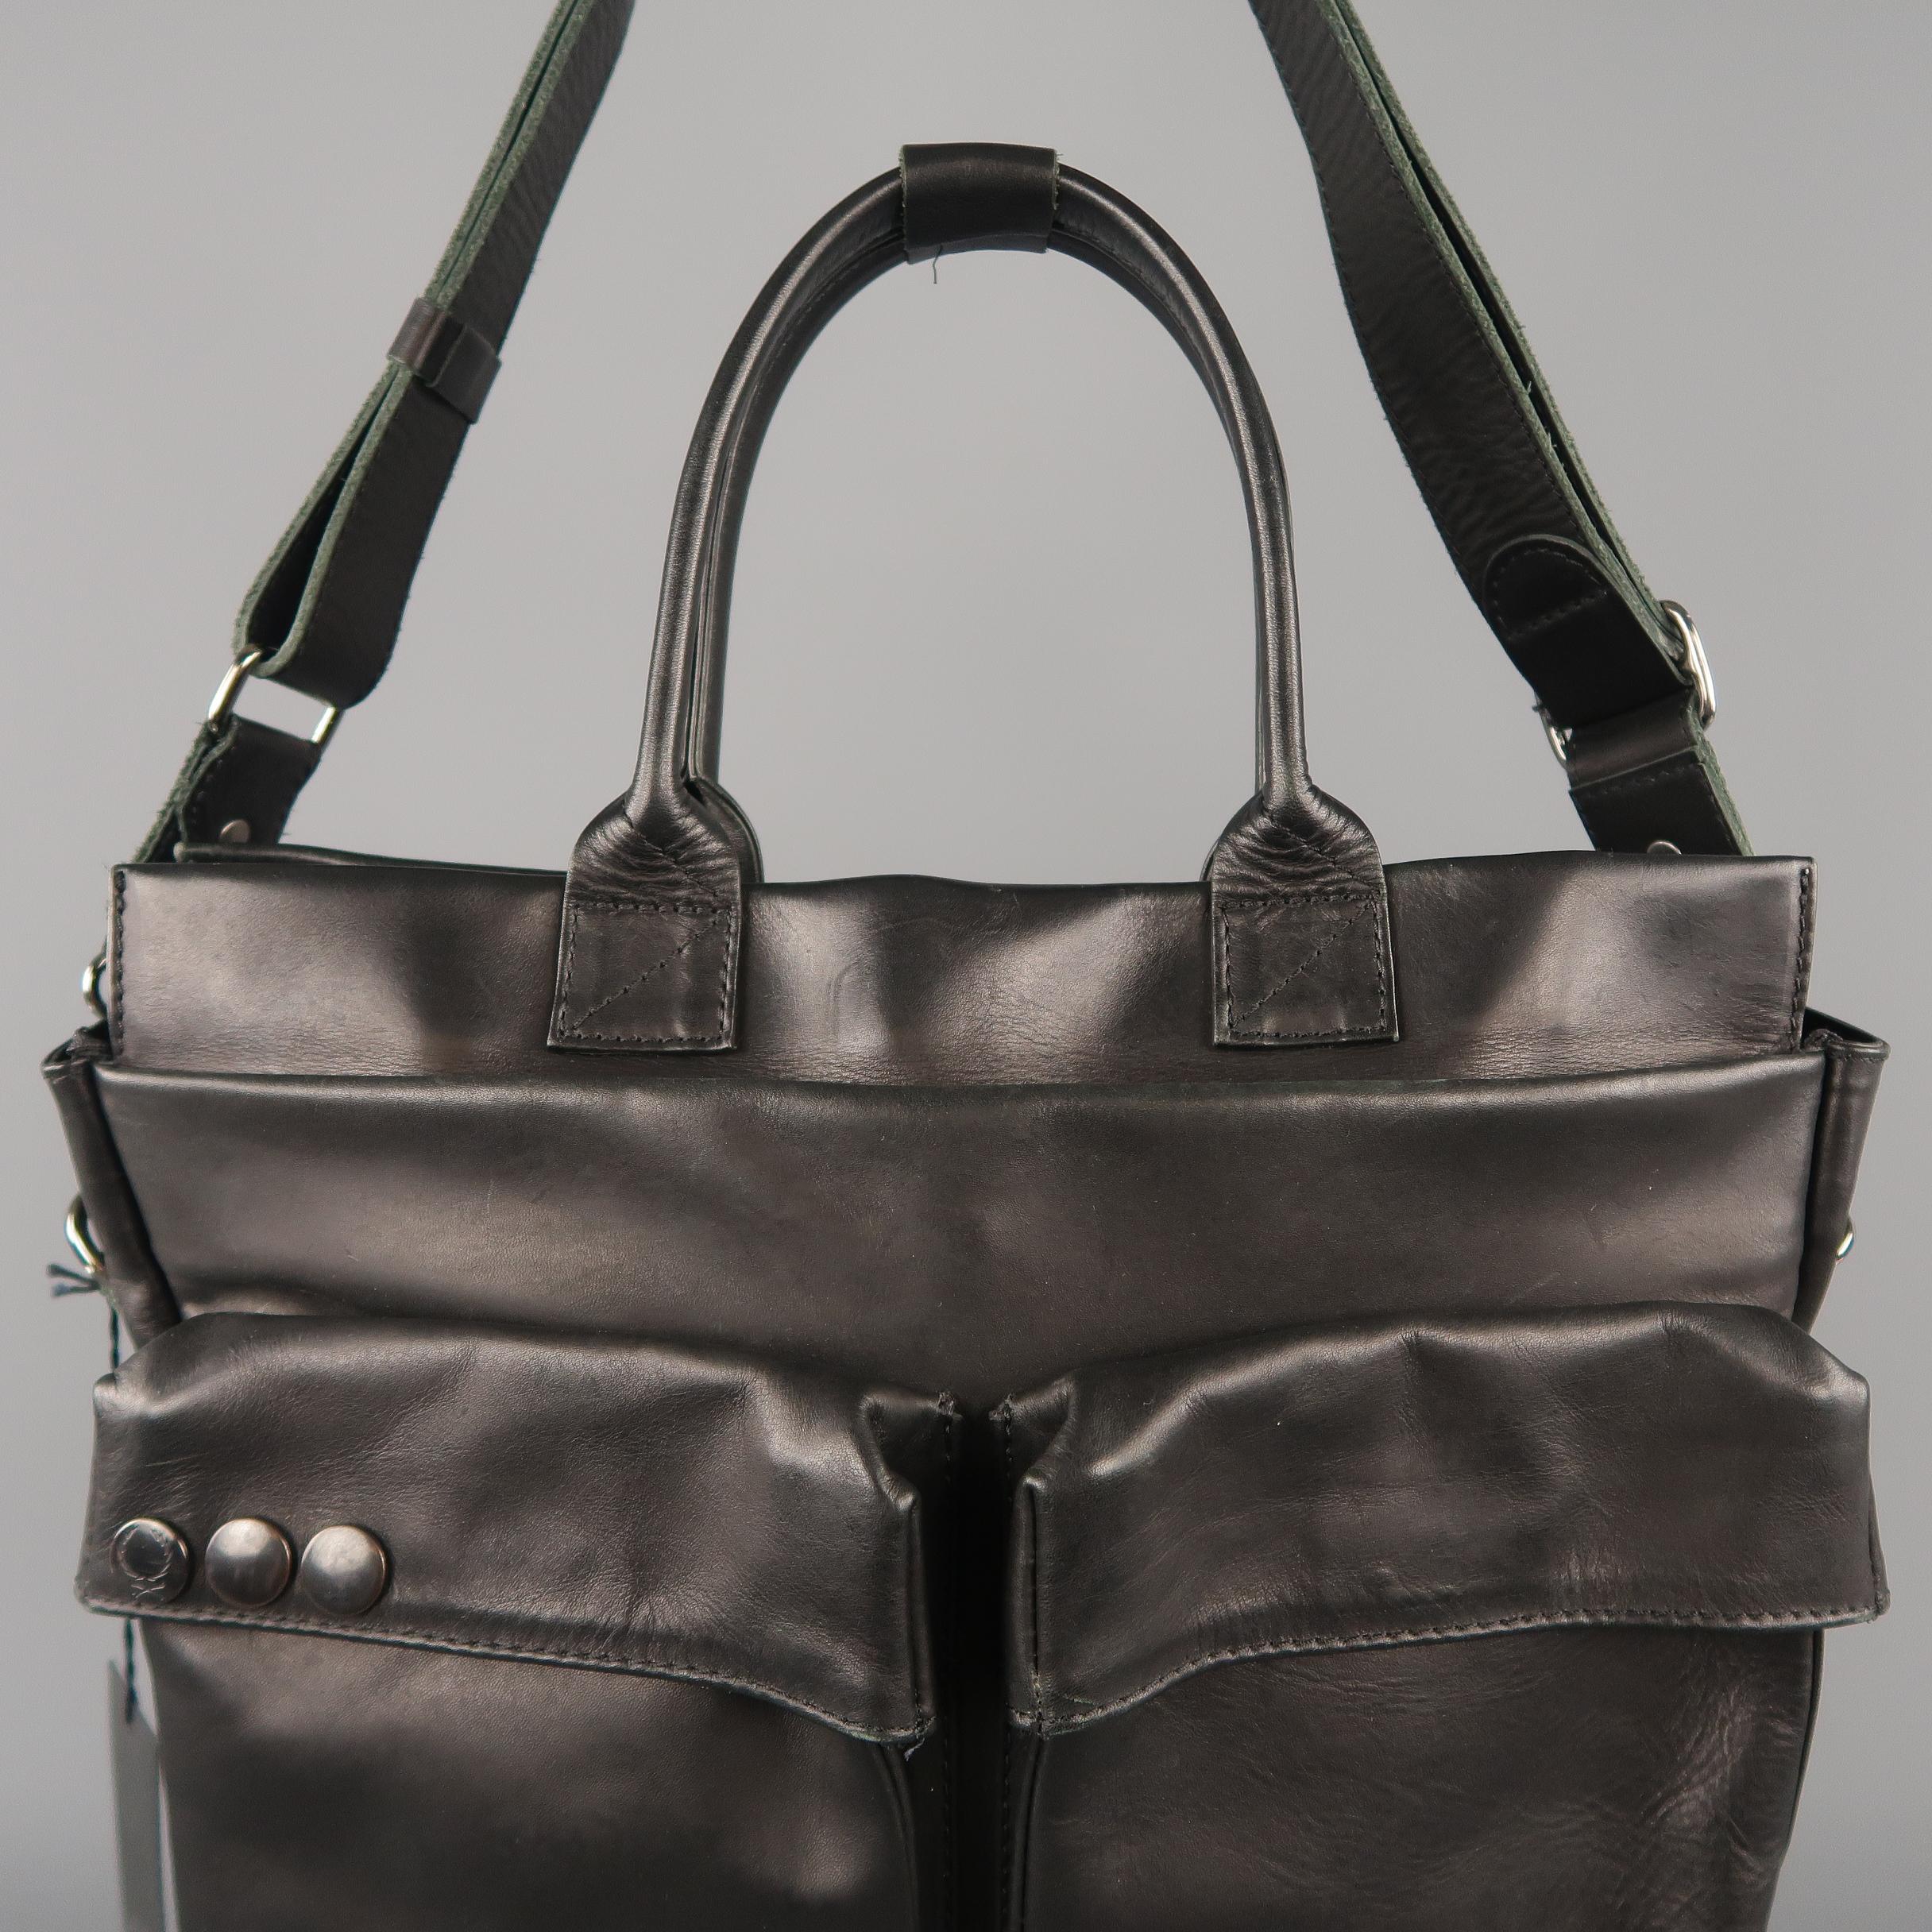 SURFACE TO AIR cargo bag in a soft black leather featuring  a front double cargo pocket, top handle, shoulder strap, dark silver tone metallic hardware, and double compartment storage. Retail price $539.00
 
New with Tags.
 
Measurements:
 
Length: